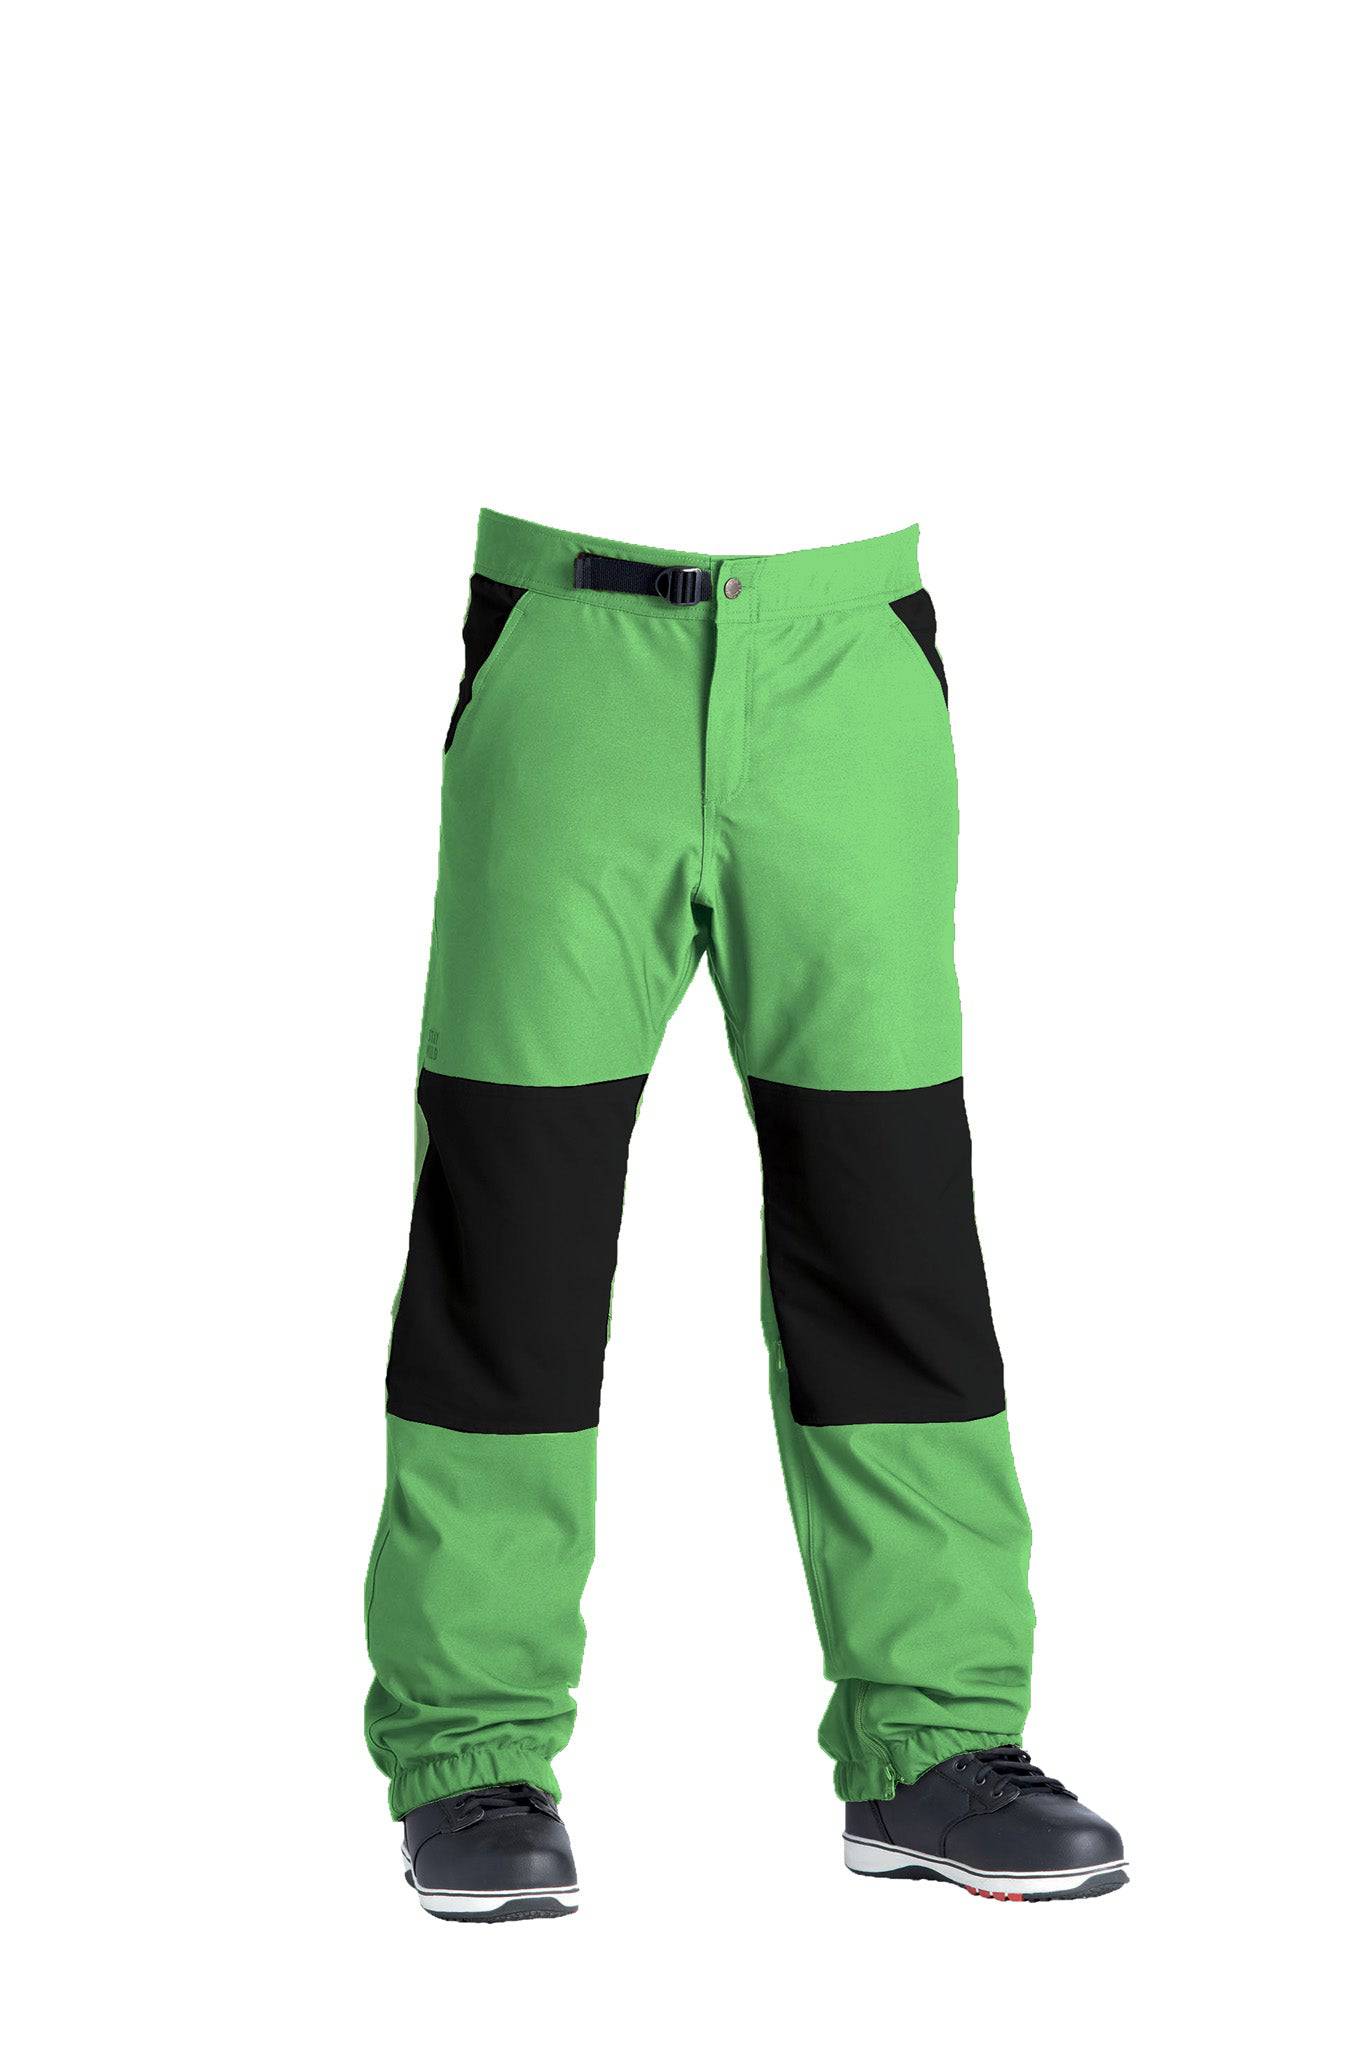 2022 Airblaster Elastic Boss Snow Pant in Hot Green – M I L O S P O R T